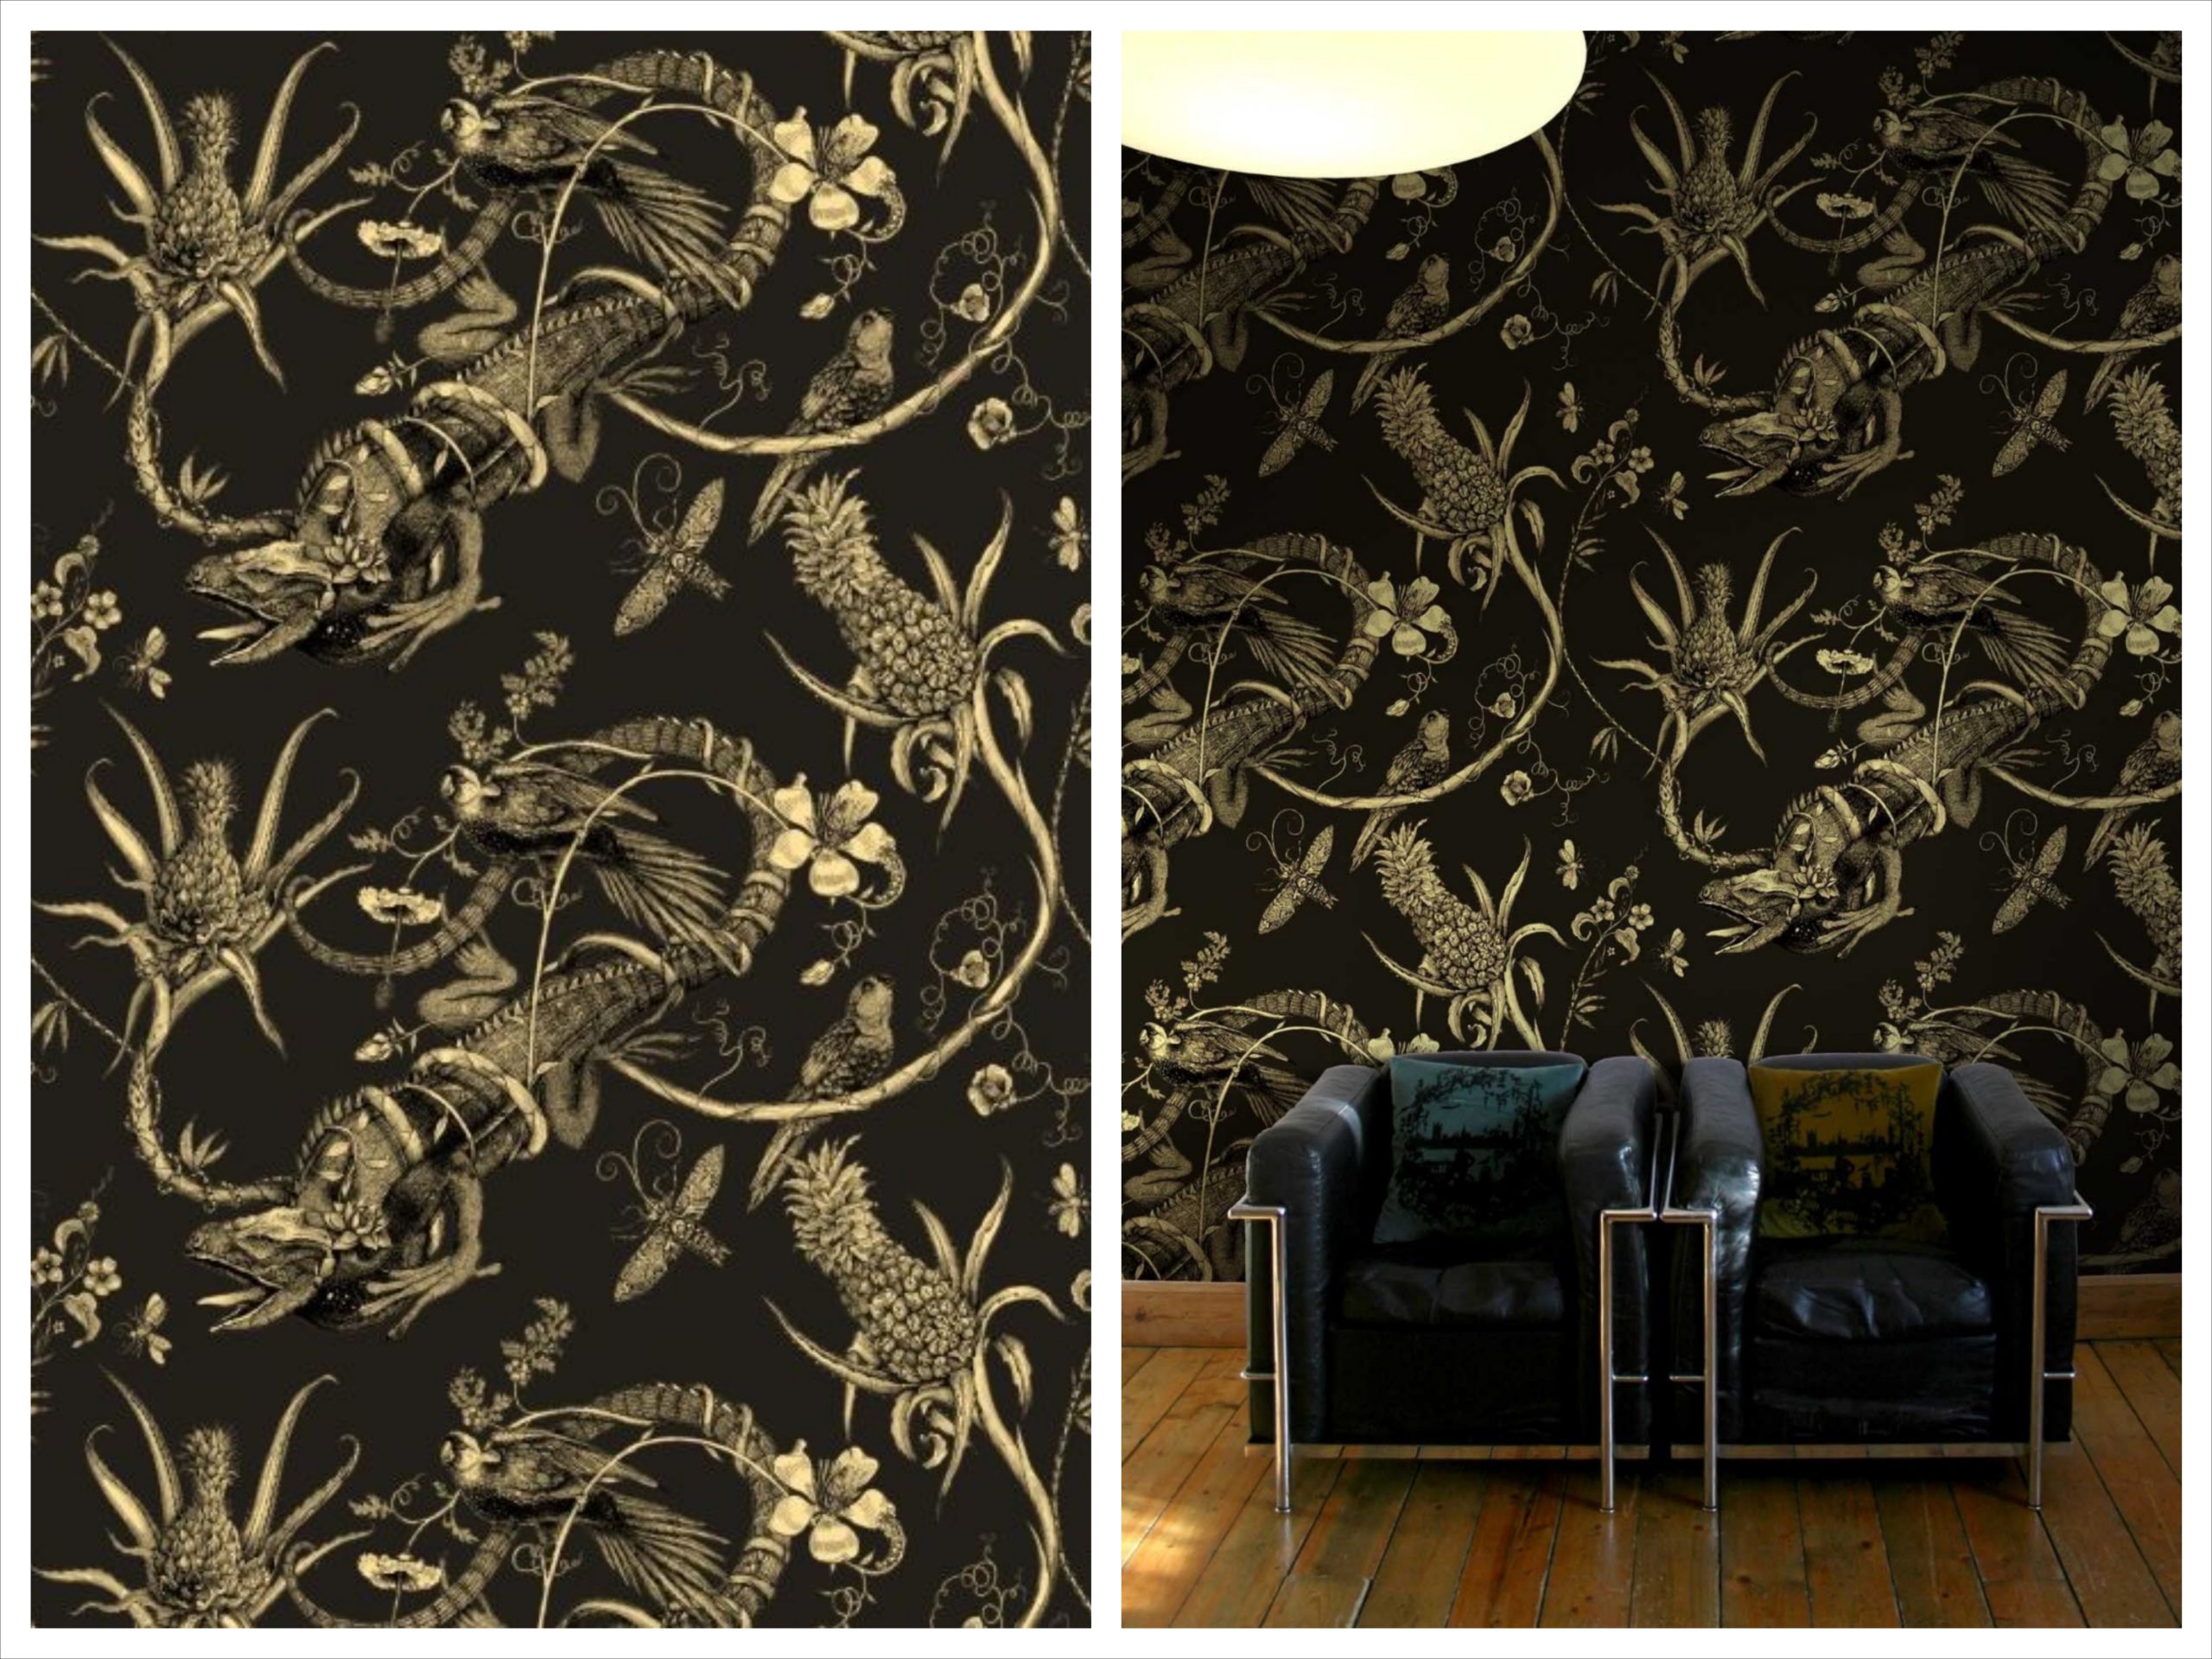 L’Essenziale Choice: 10 Bold And Beautiful Wallpapers